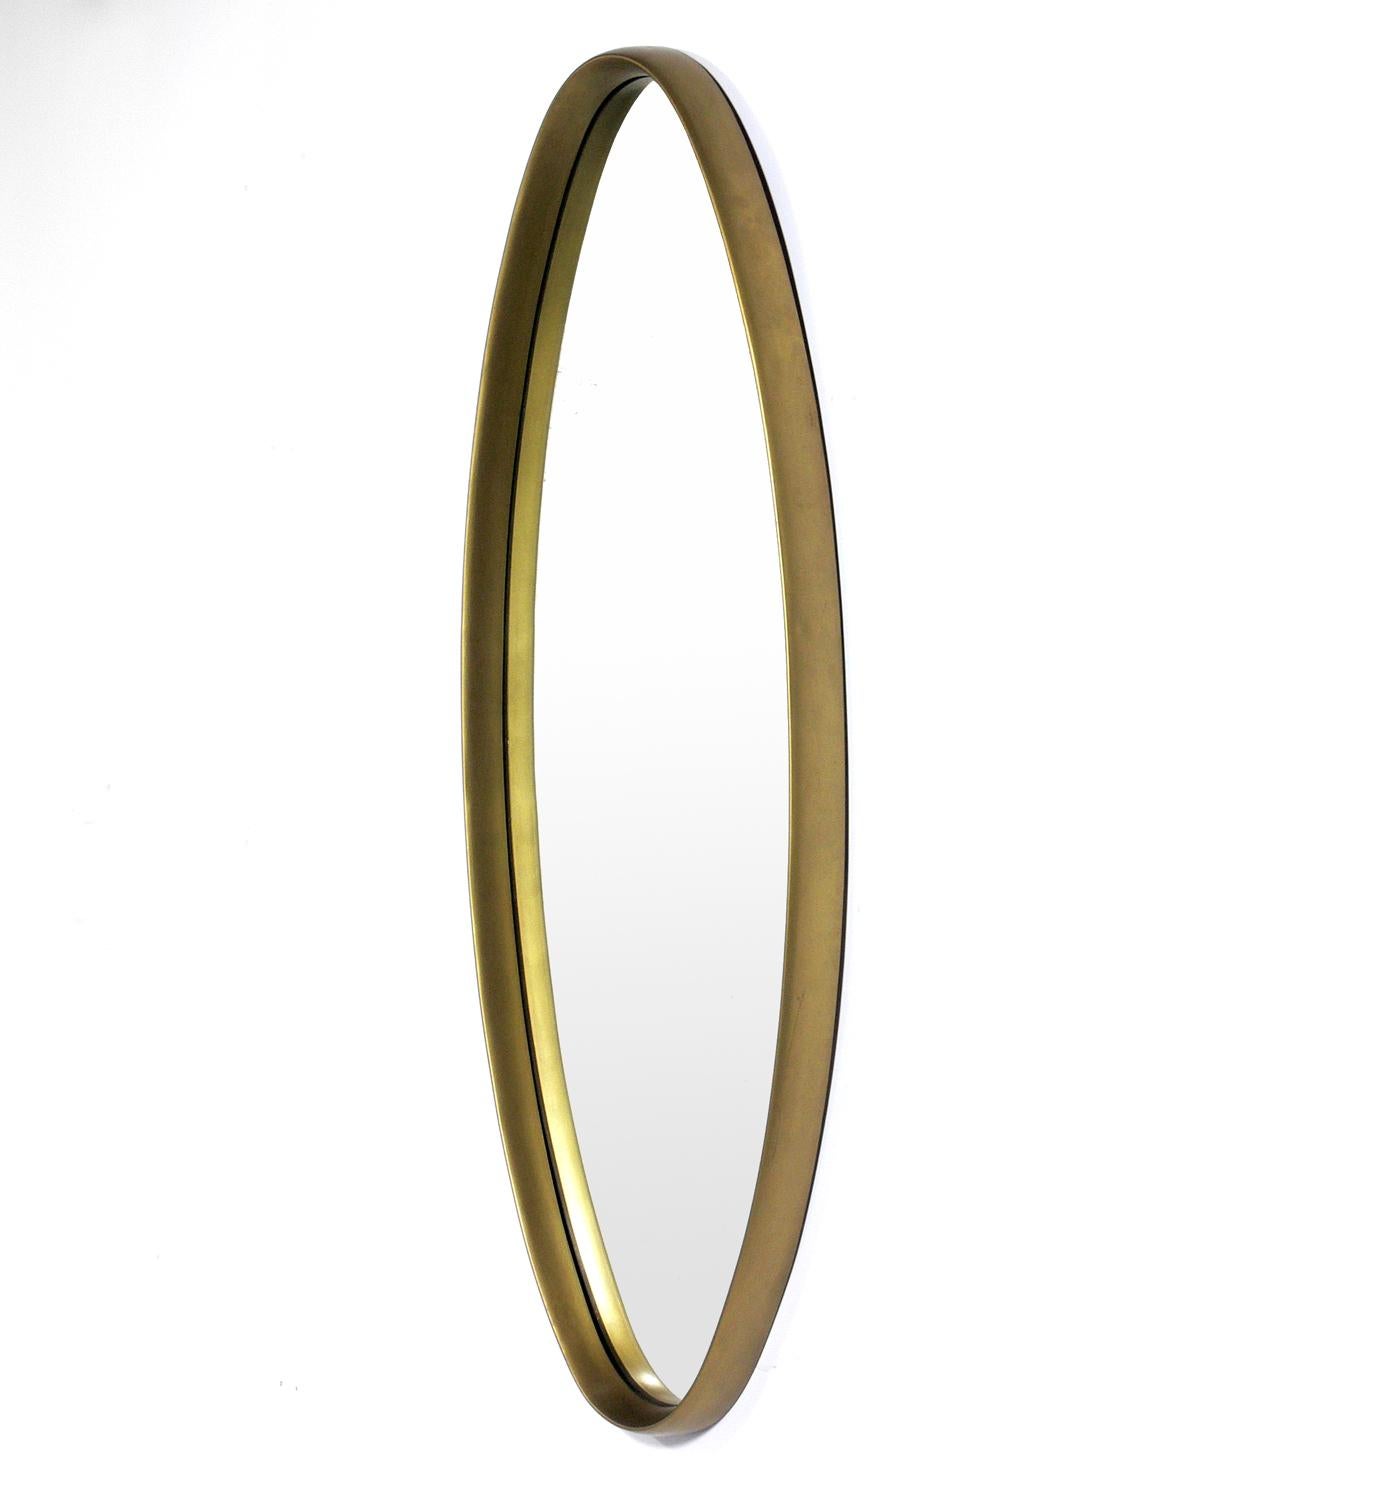 Midcentury oval gold mirror, American, circa 1960s. This mirror has a sculptural form and would fit seamlessly into a wide range of interiors, from traditional to ultra modern.